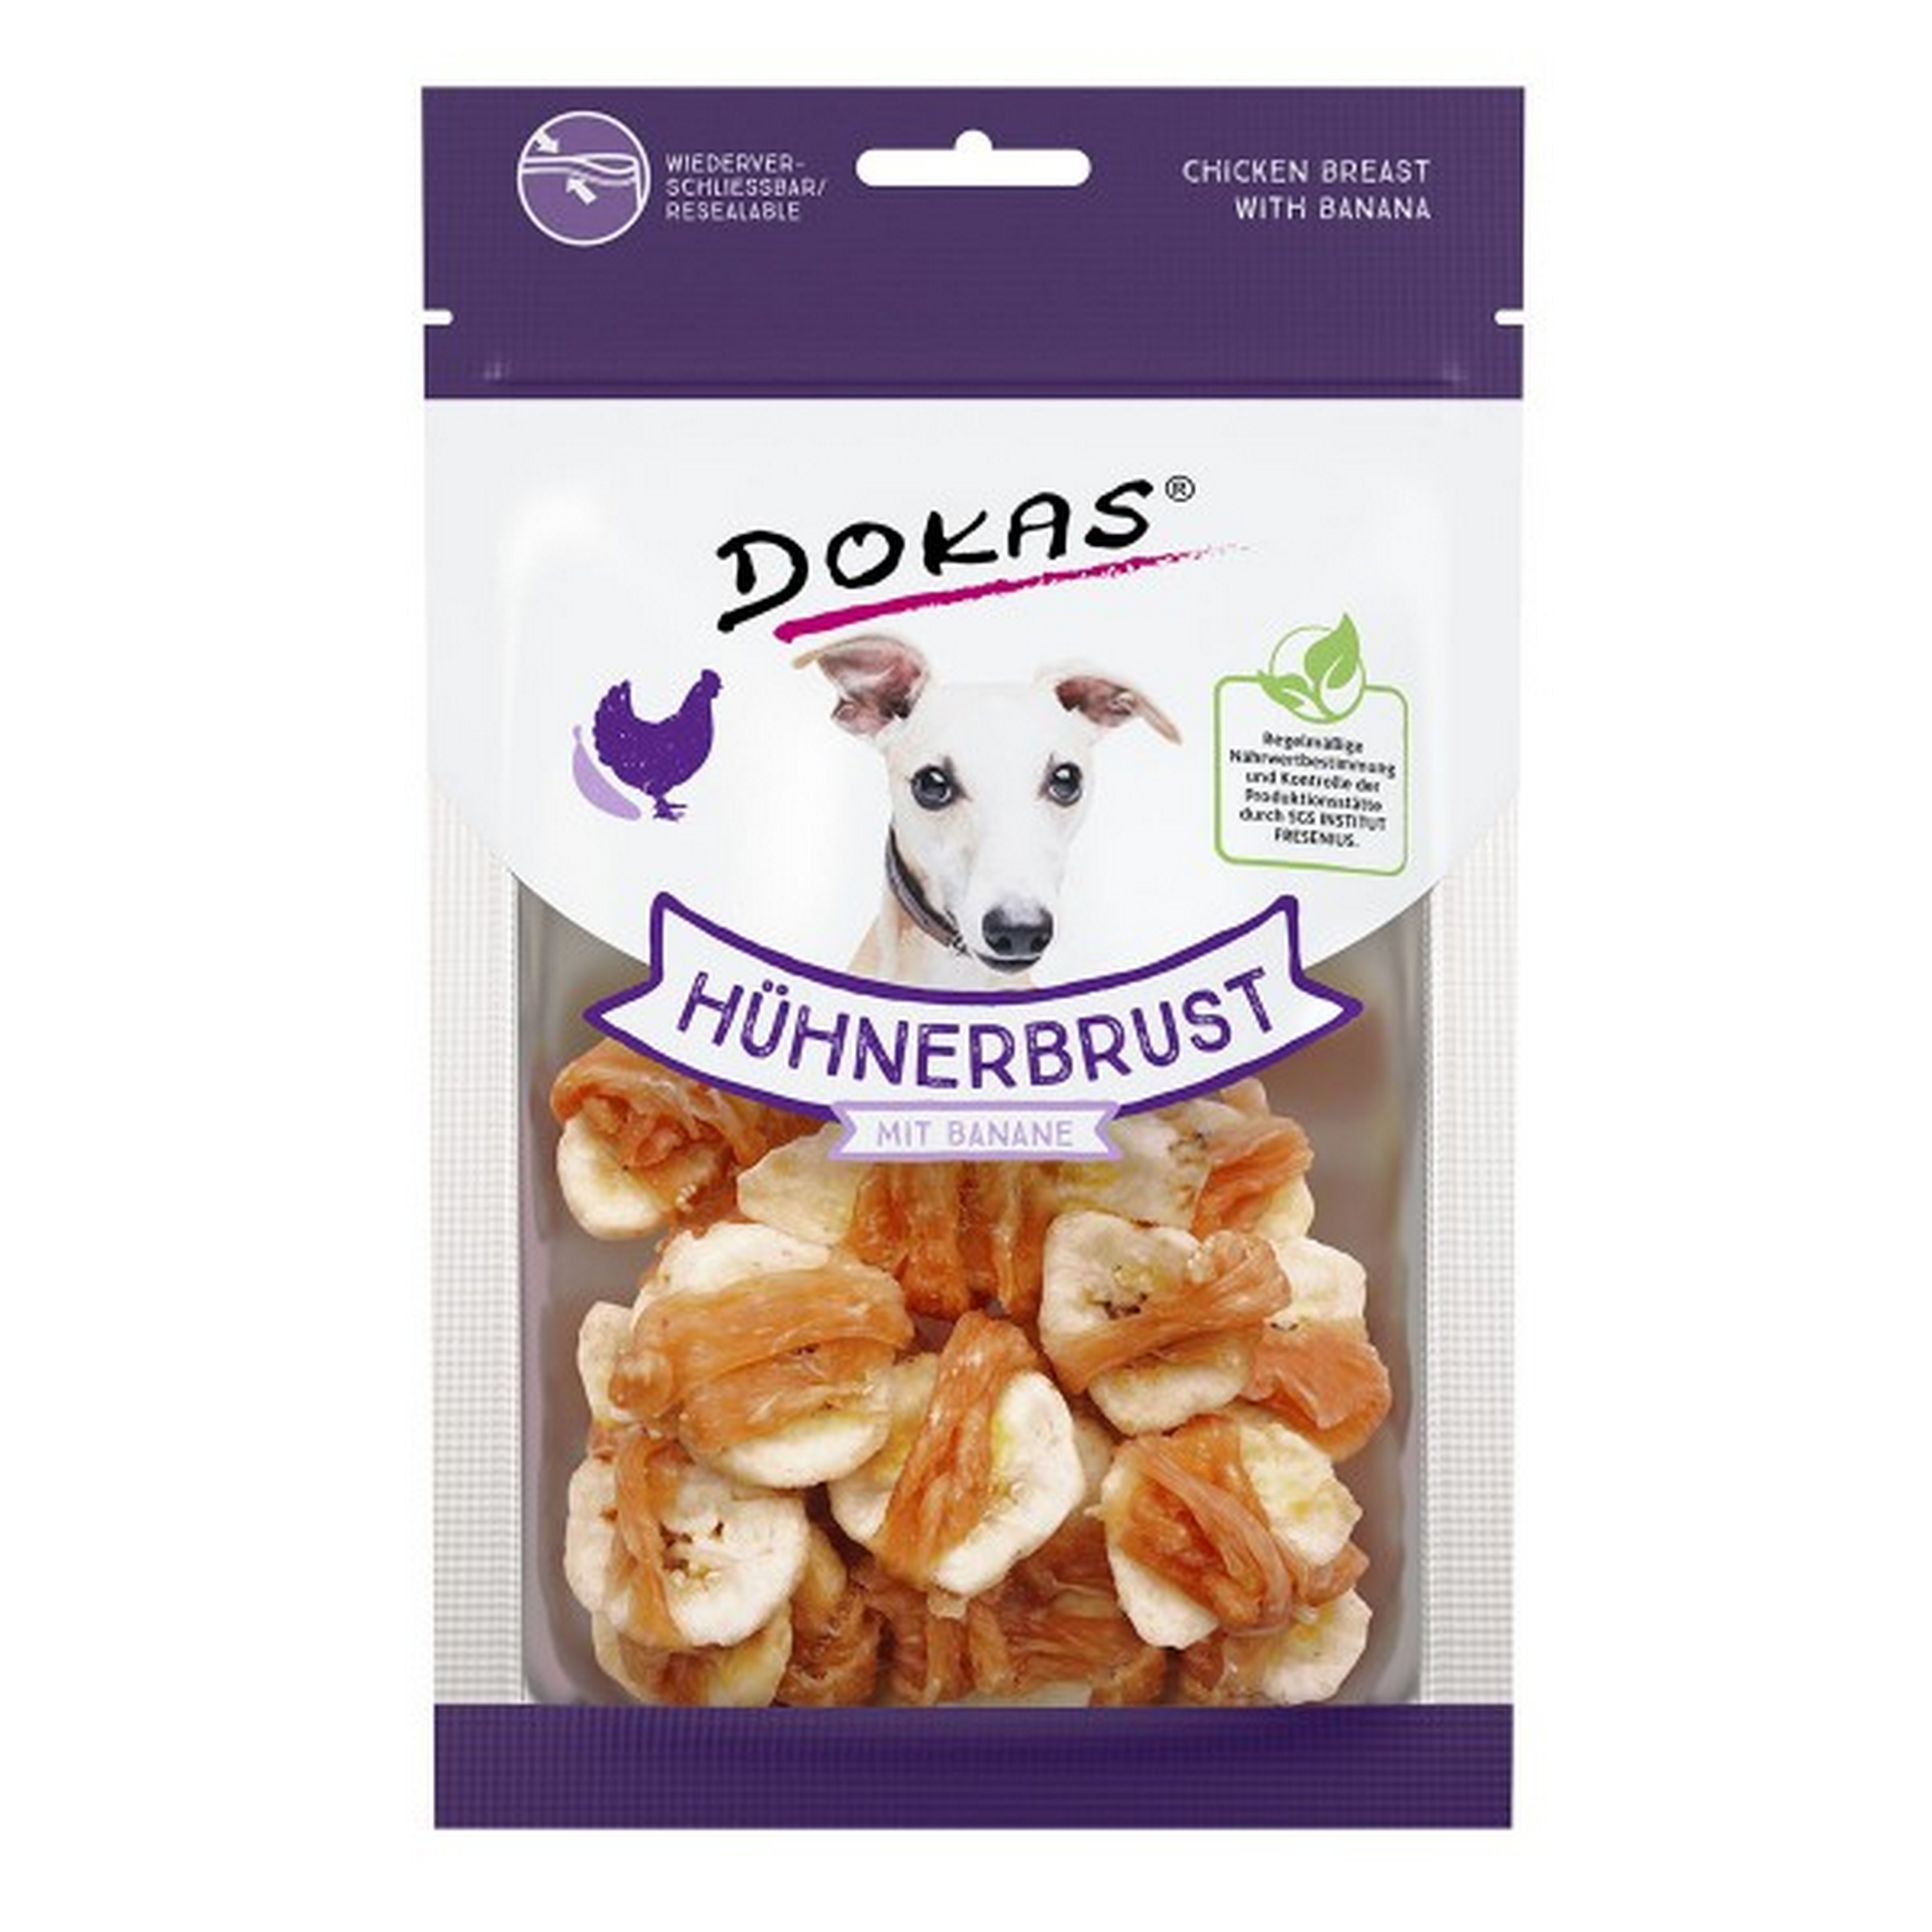 Hundesnack Hühnerbrust mit Banane 70 g + product picture